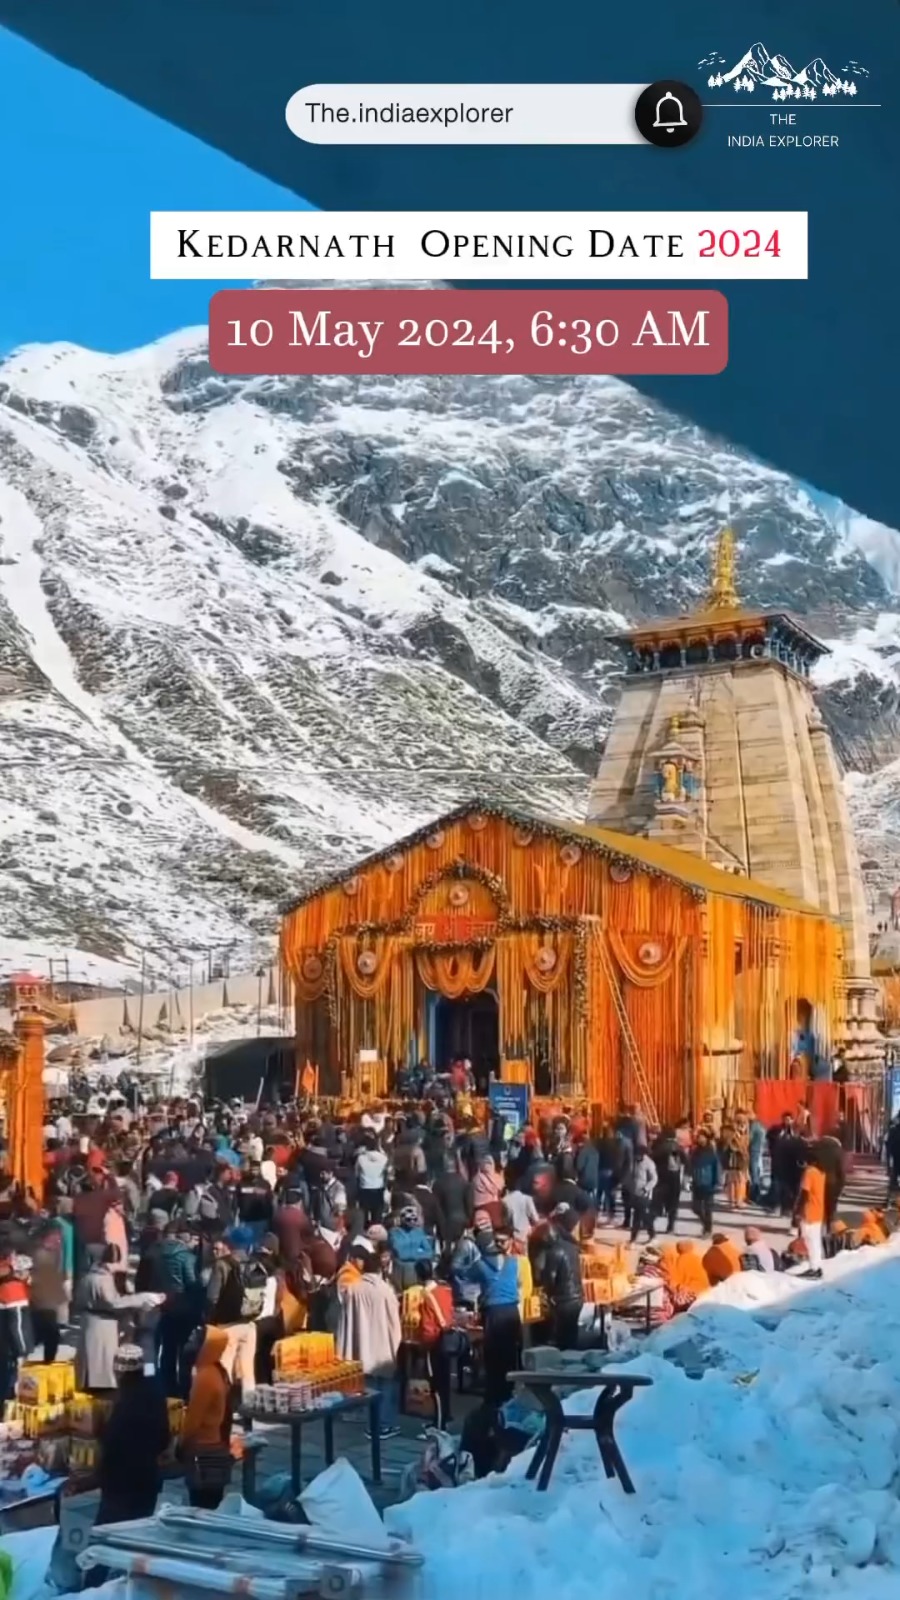 🔱 Kedarnath Opening Date is Here! Priests of the Omkareshwar Temple have set a date of Kedarnath Temple’s opening according to the Panchang. 🕉 .